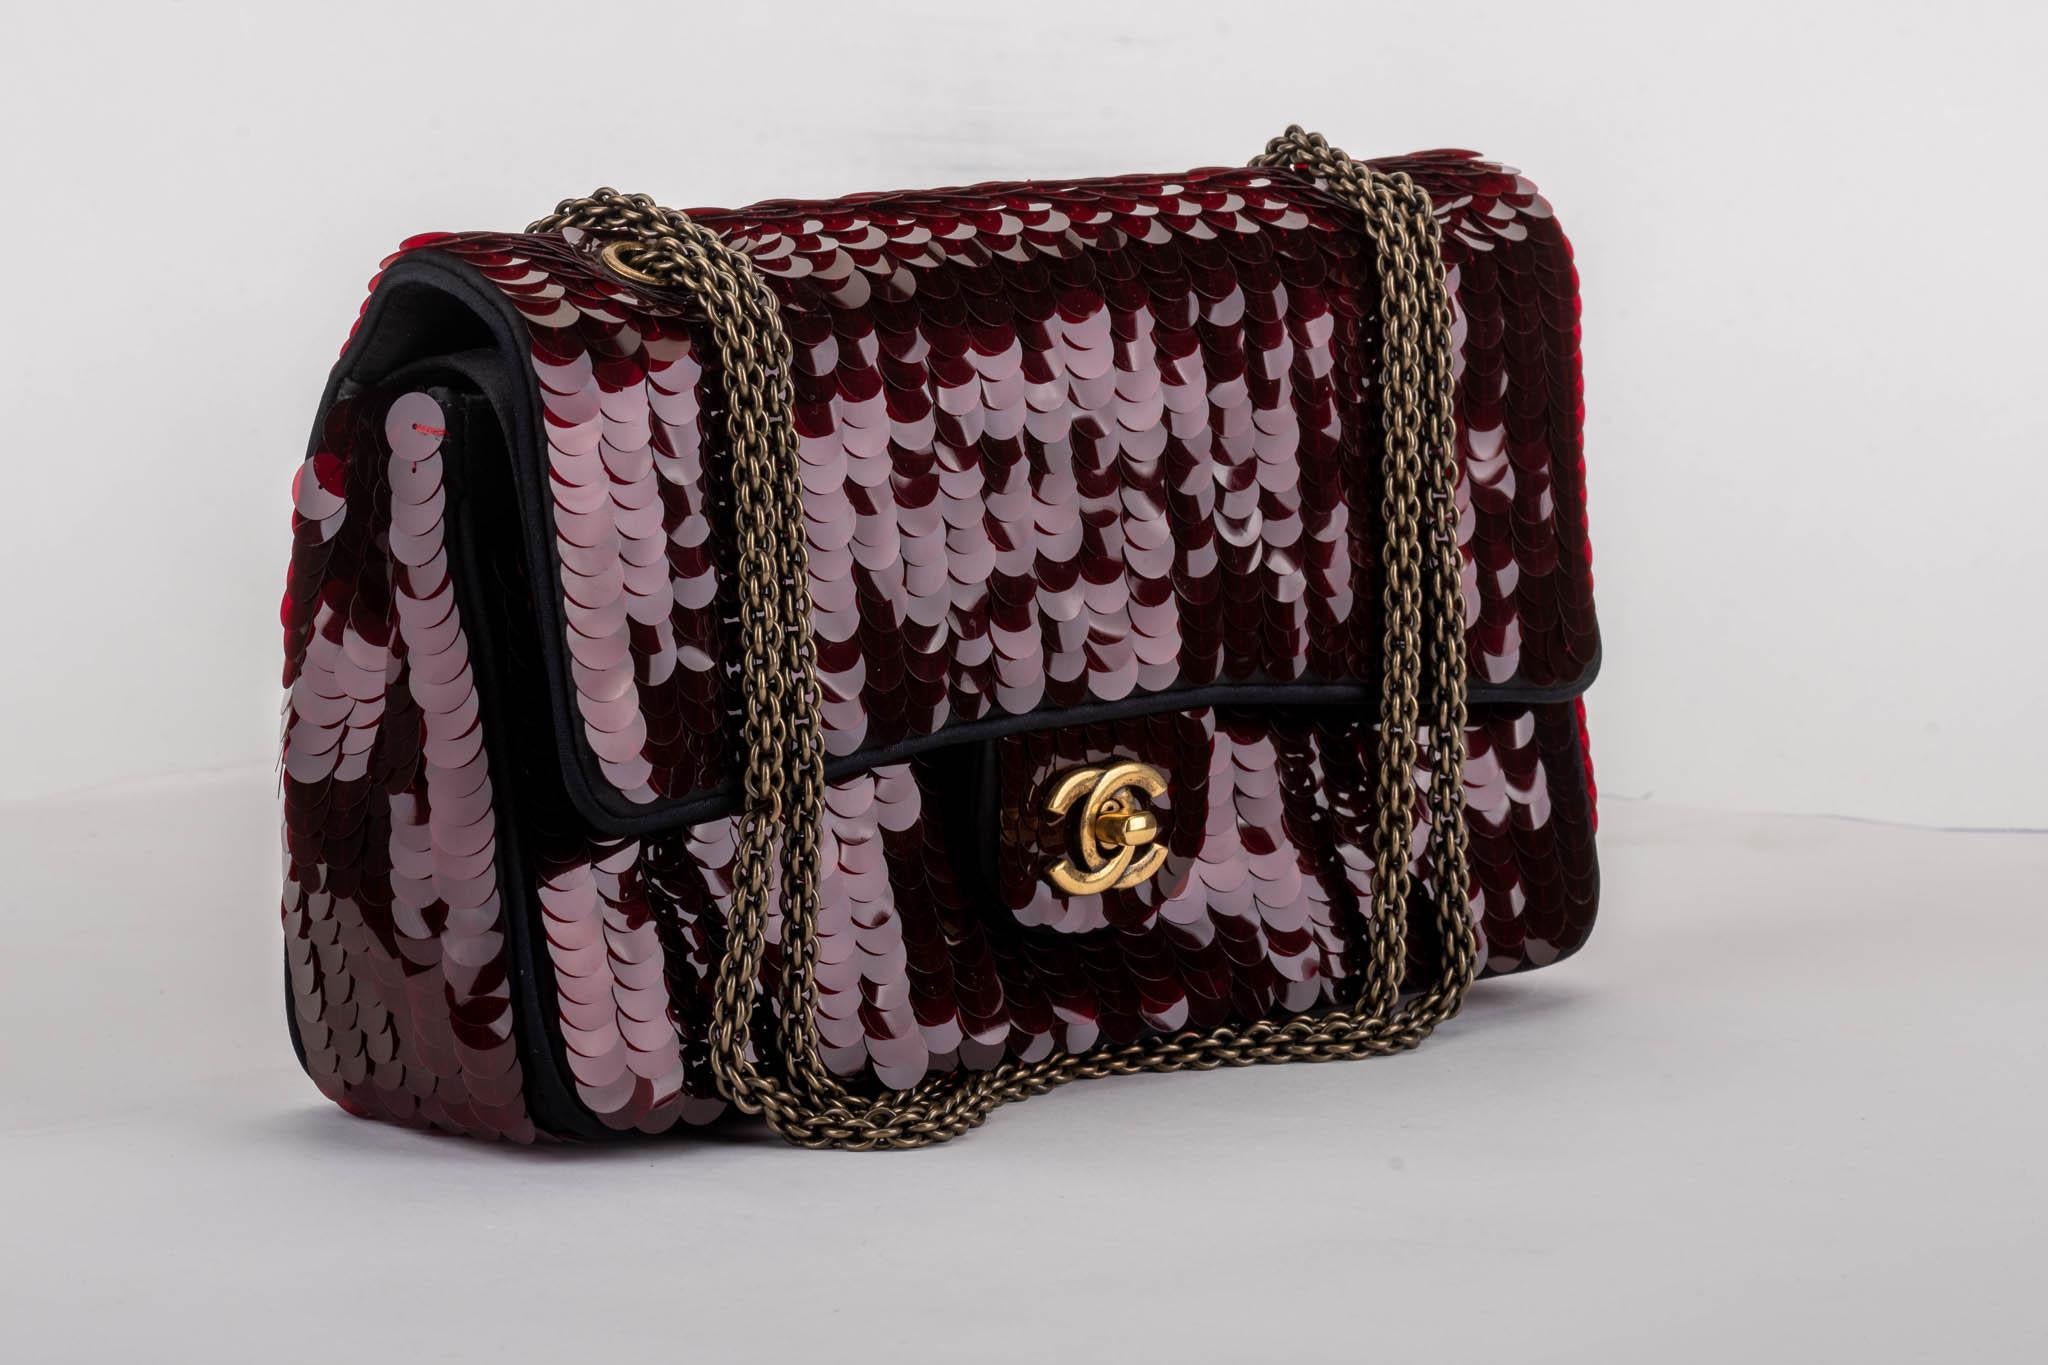 Chanel brand new limited edition Shanghai collection in burgundy sequins and black silk satin double flap. Strap drop 17.75